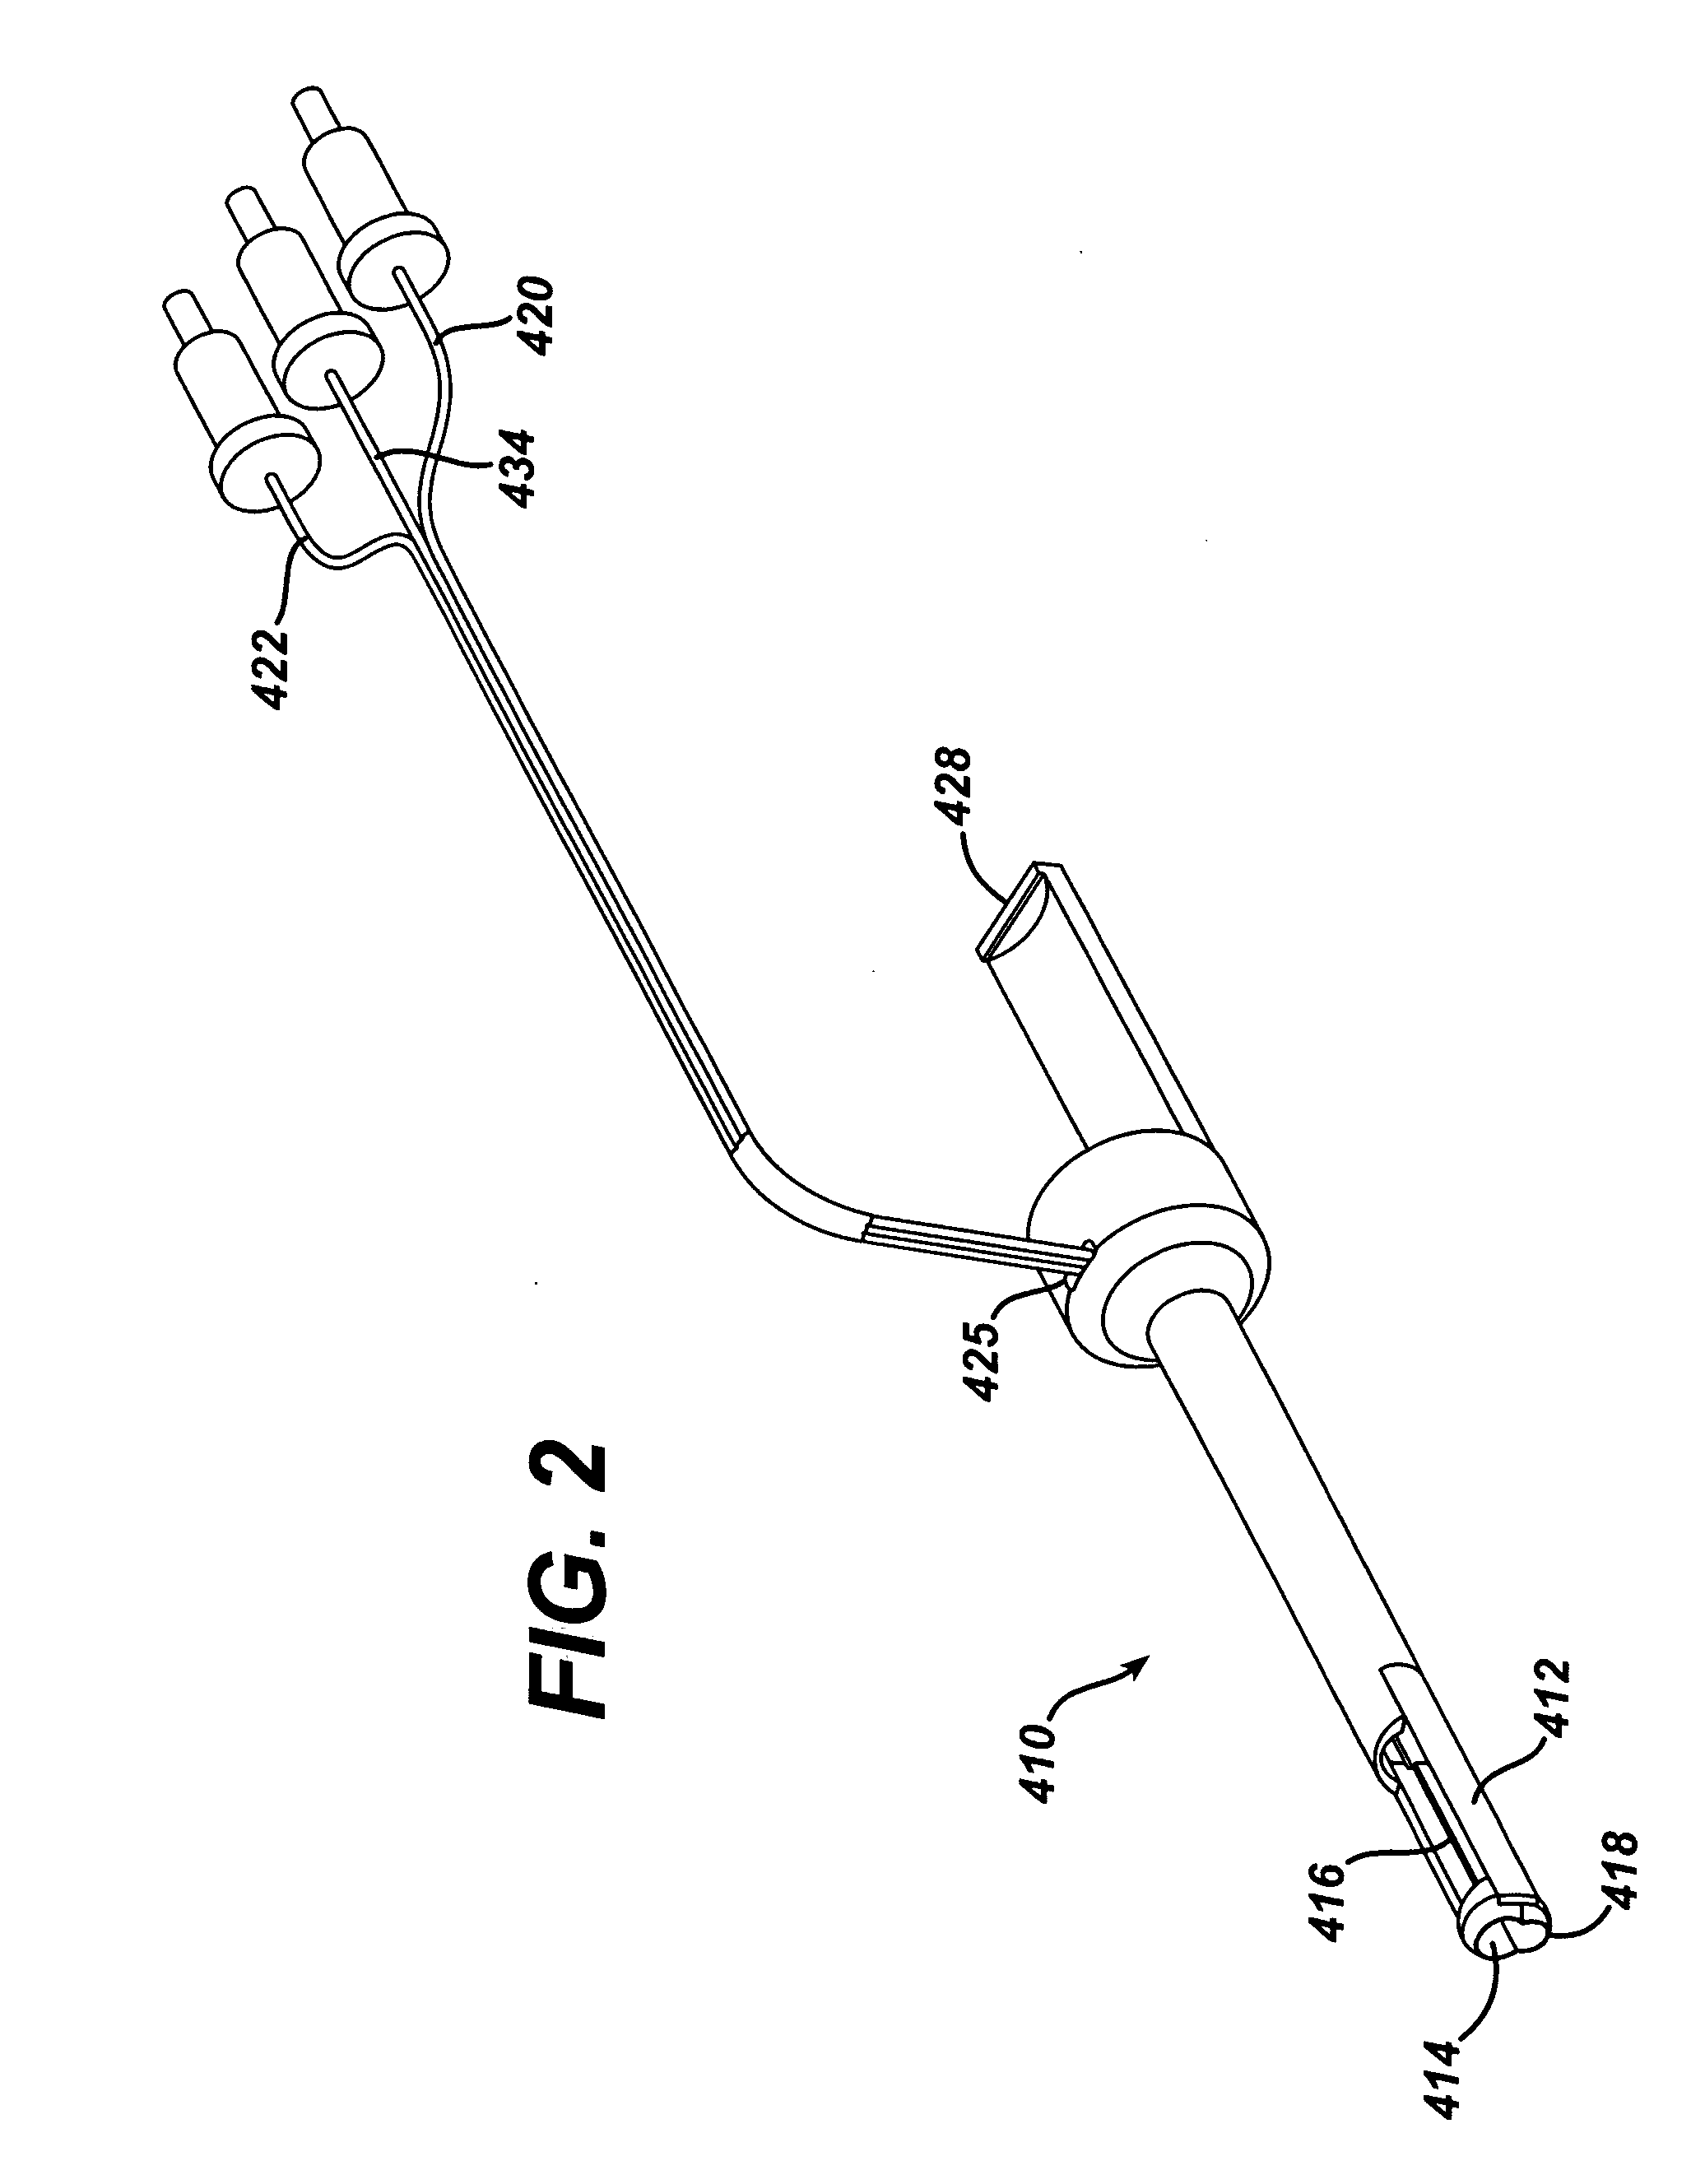 Electrode sleeve for biopsy device